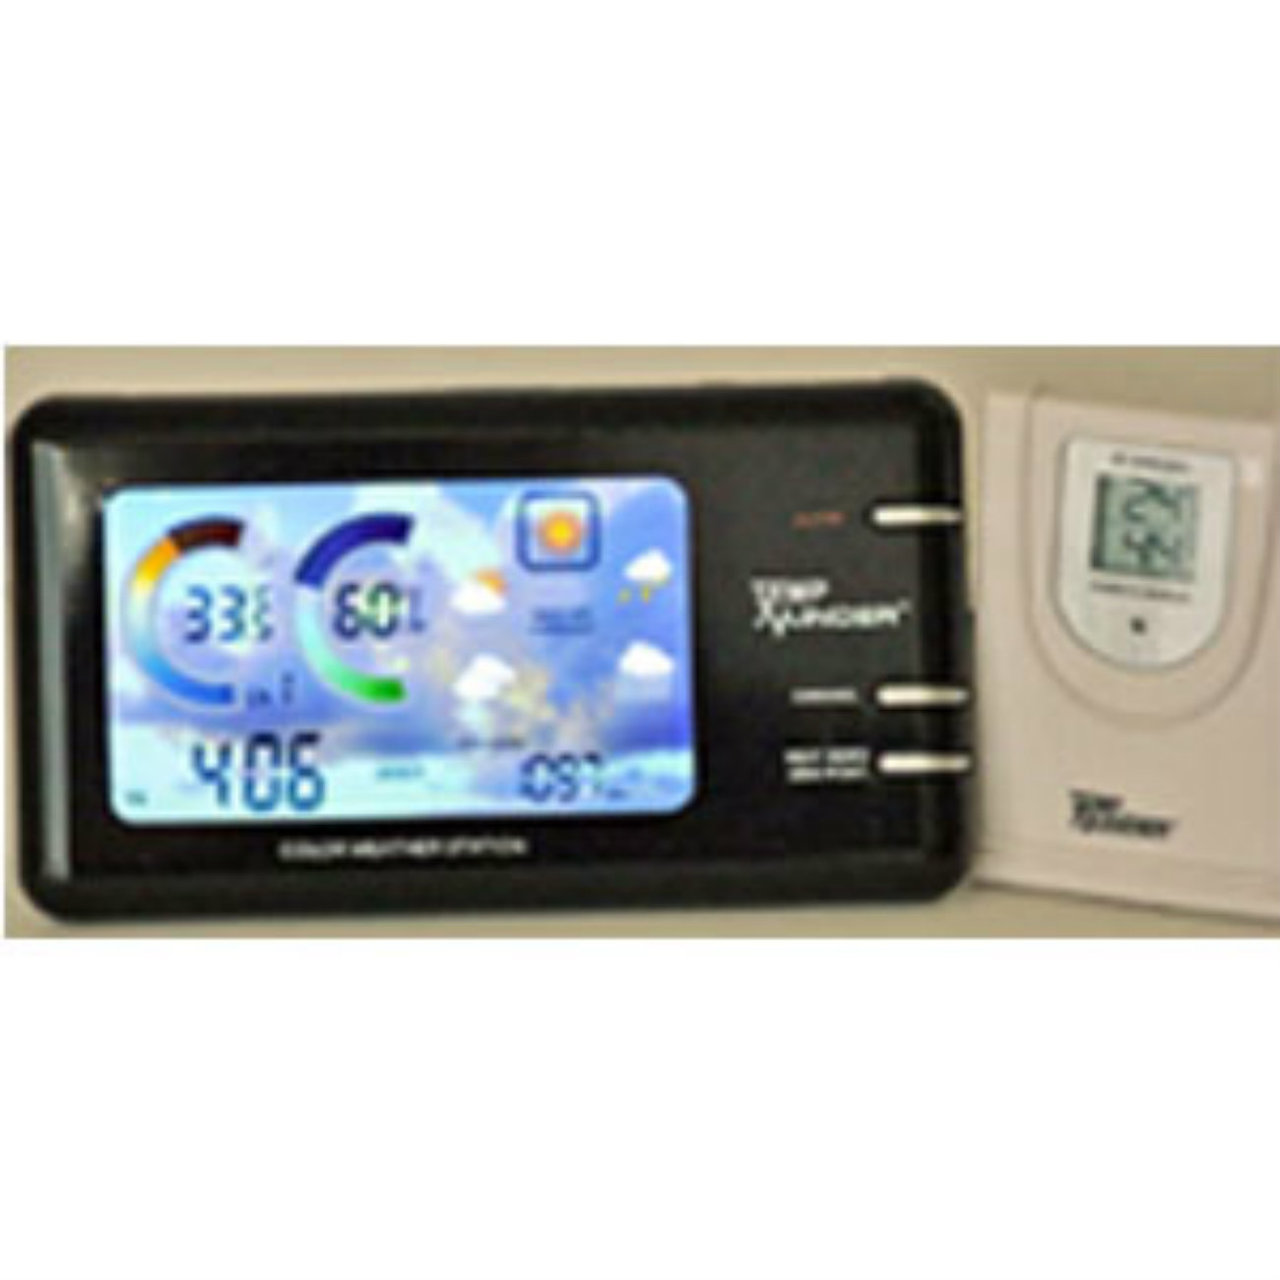 TempMinder RV Weather Stations - Electronic Weather Station - MRI-822MX  Review Video